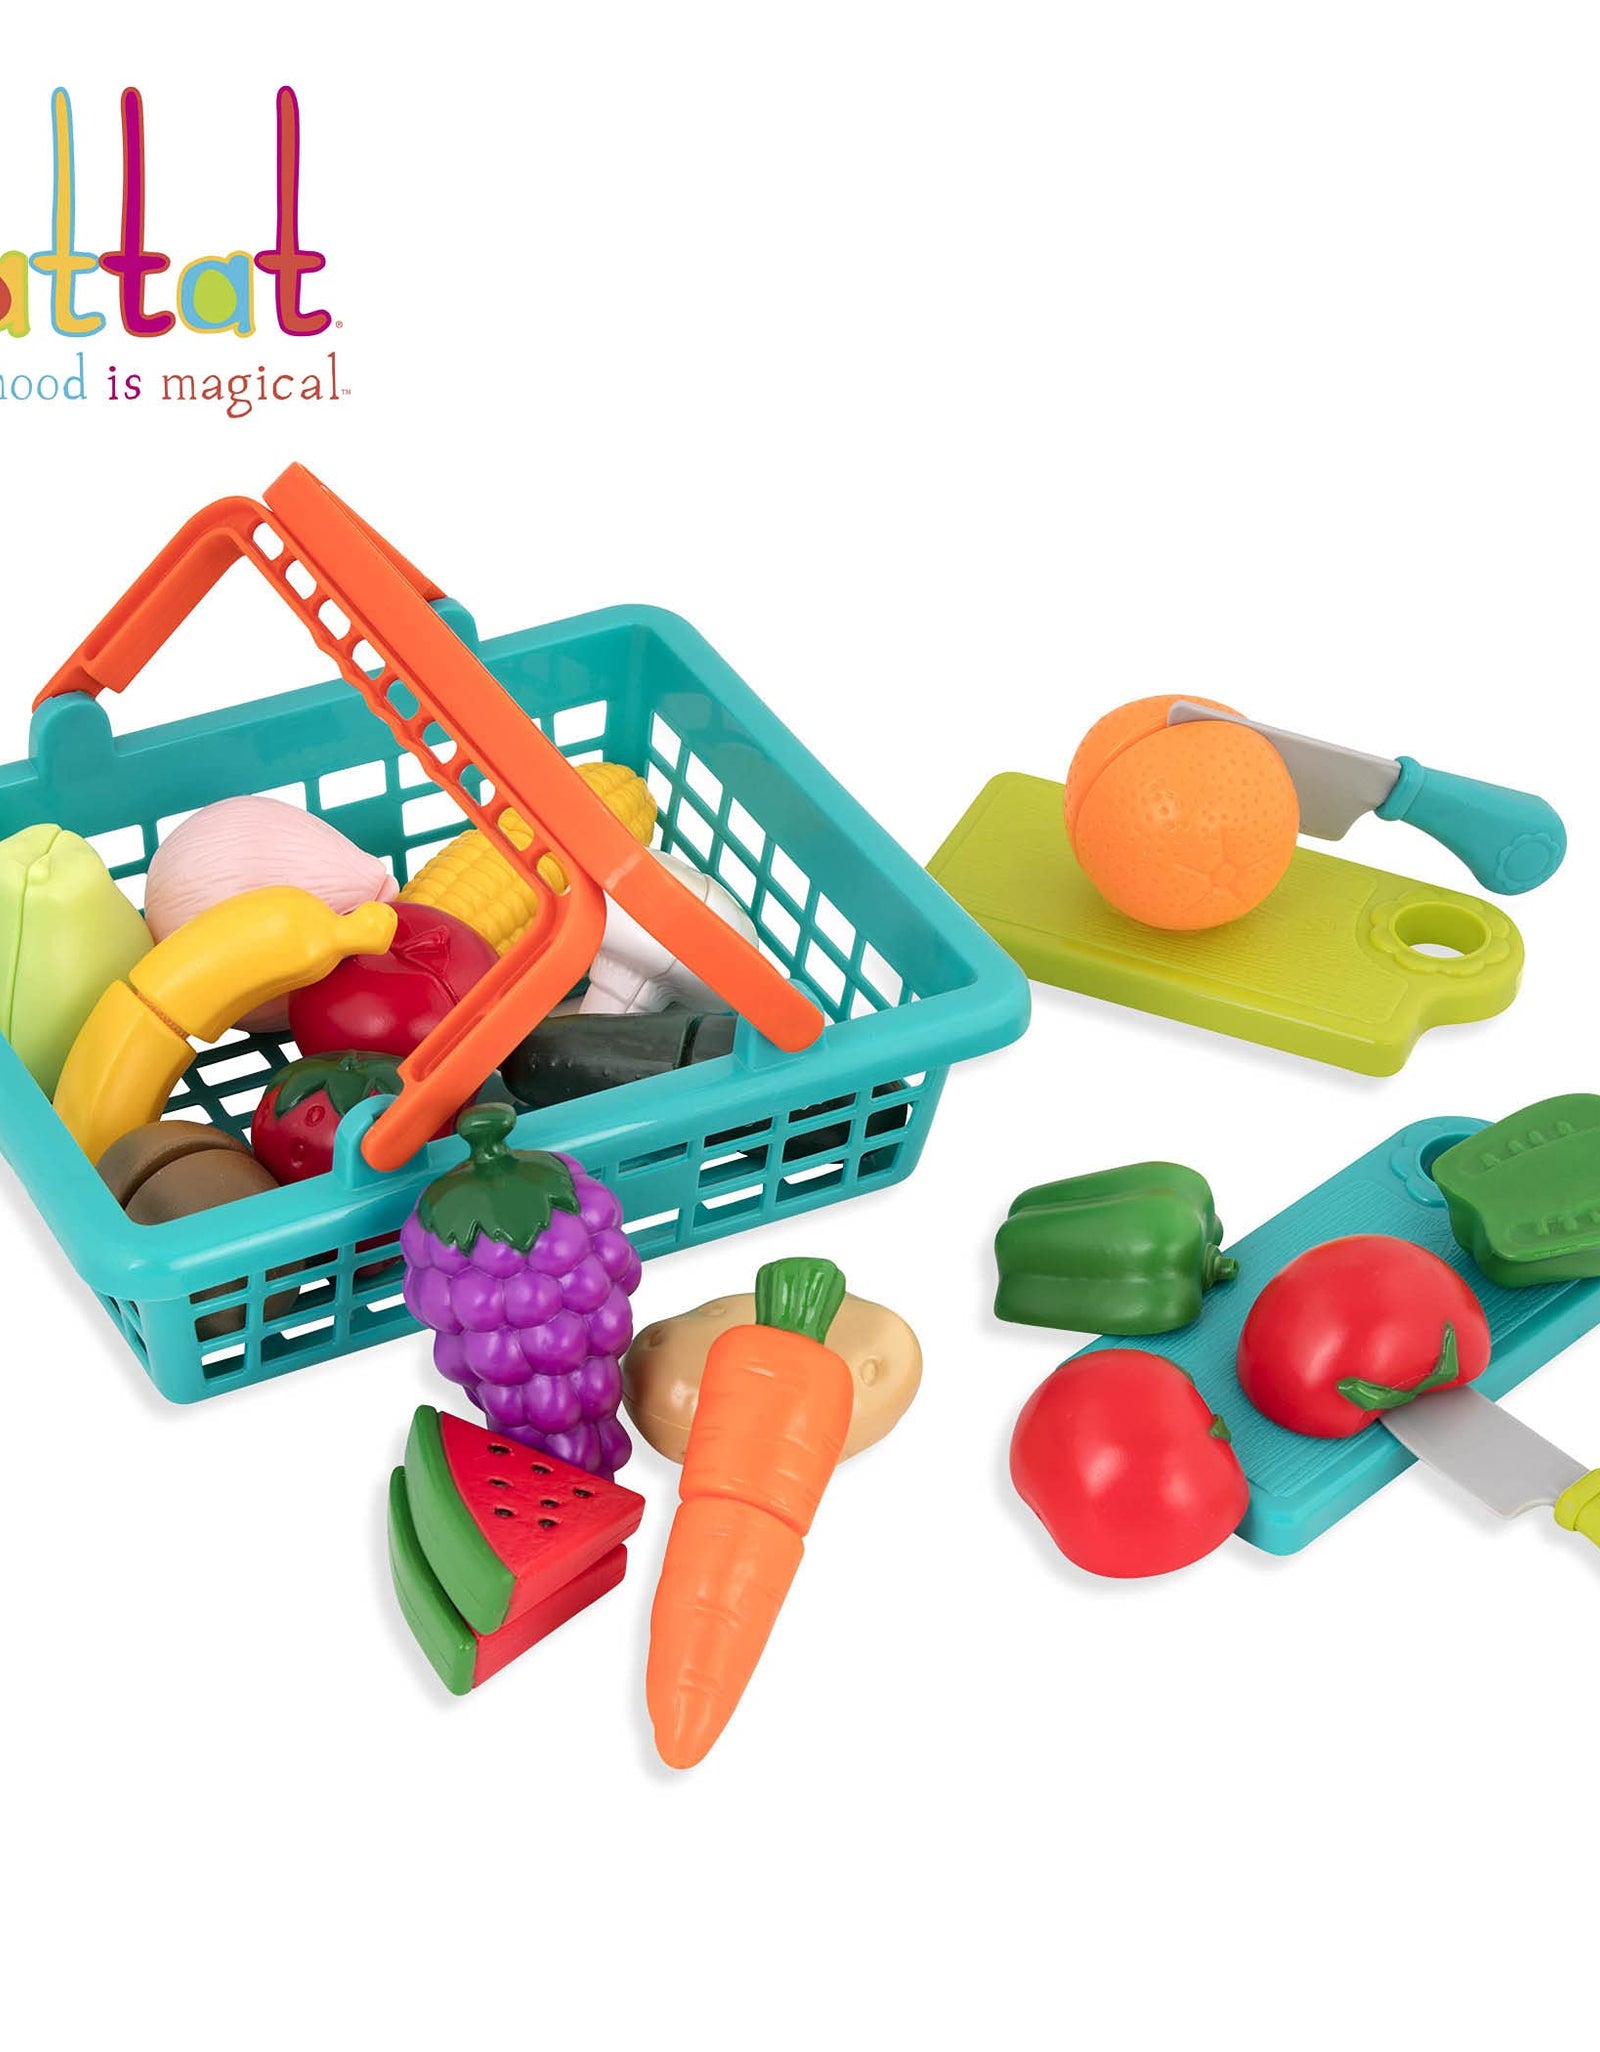 Battat – Farmers Market Basket – Toy Kitchen Accessories – Pretend Cutting Play Food Set for Toddlers 3 Years + (37-Pcs)